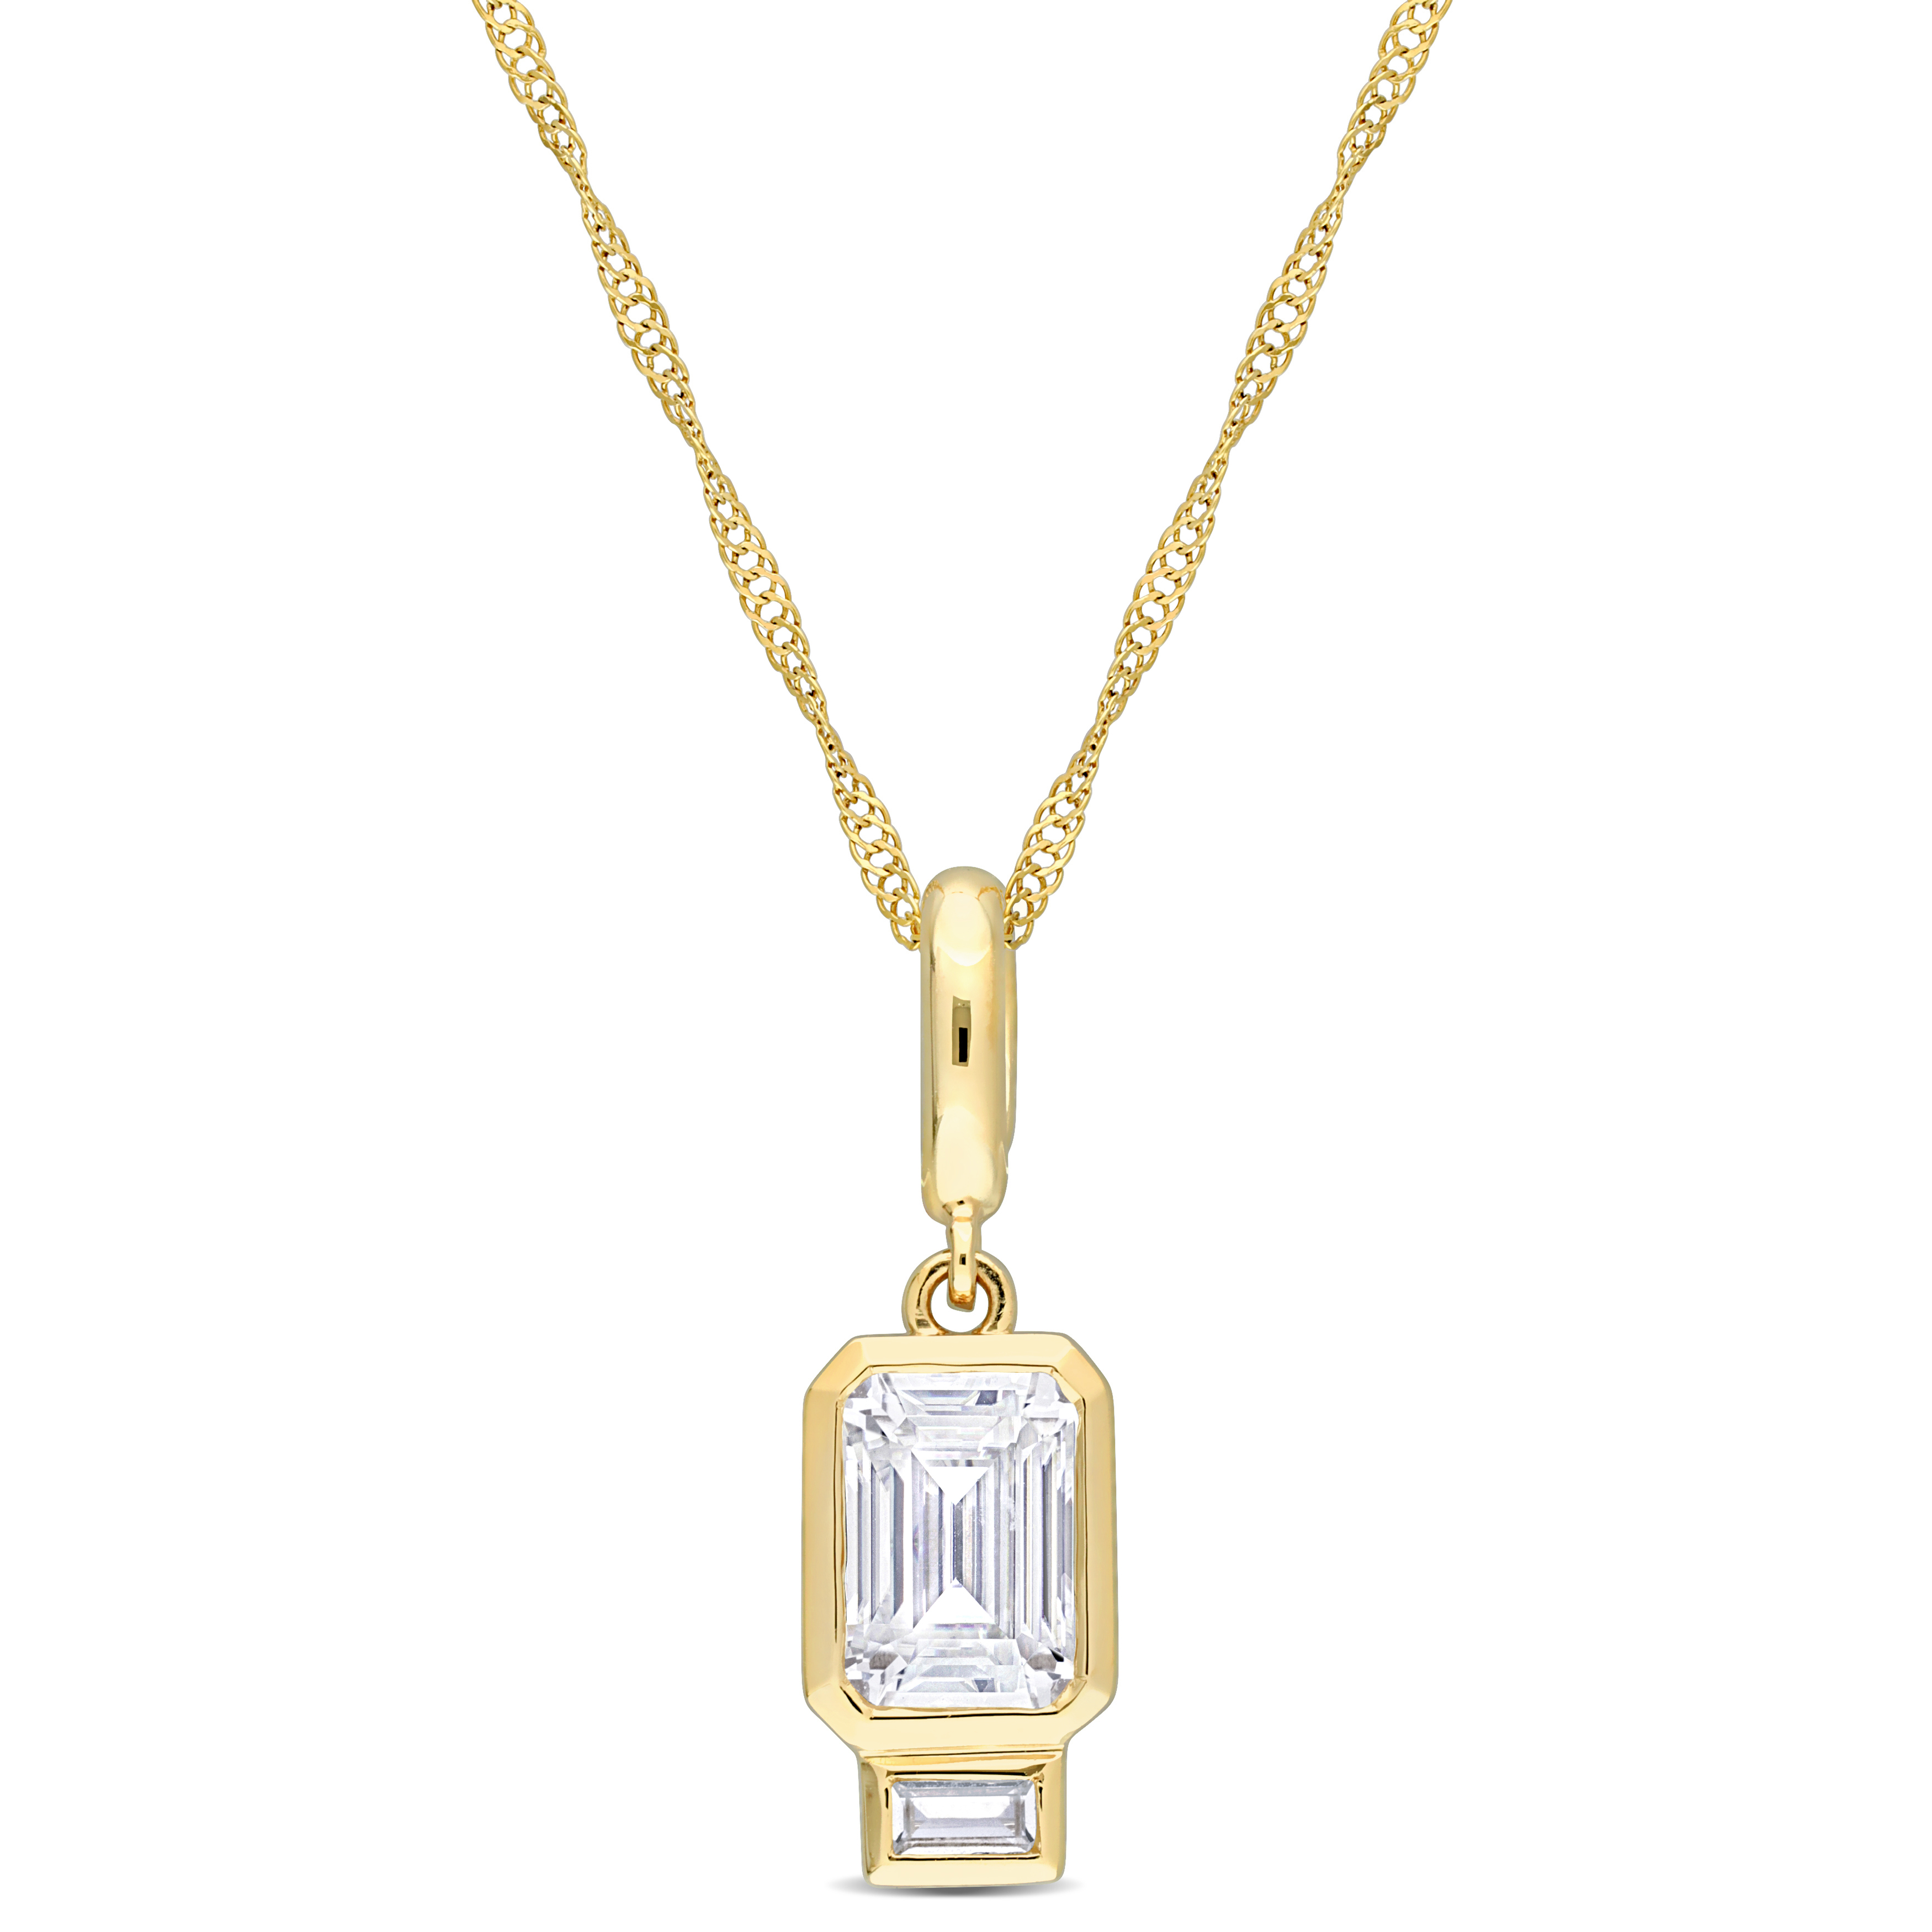 1/4 CT TW Pave Diamond Heart Pendant with Chain in 14k Yellow Gold